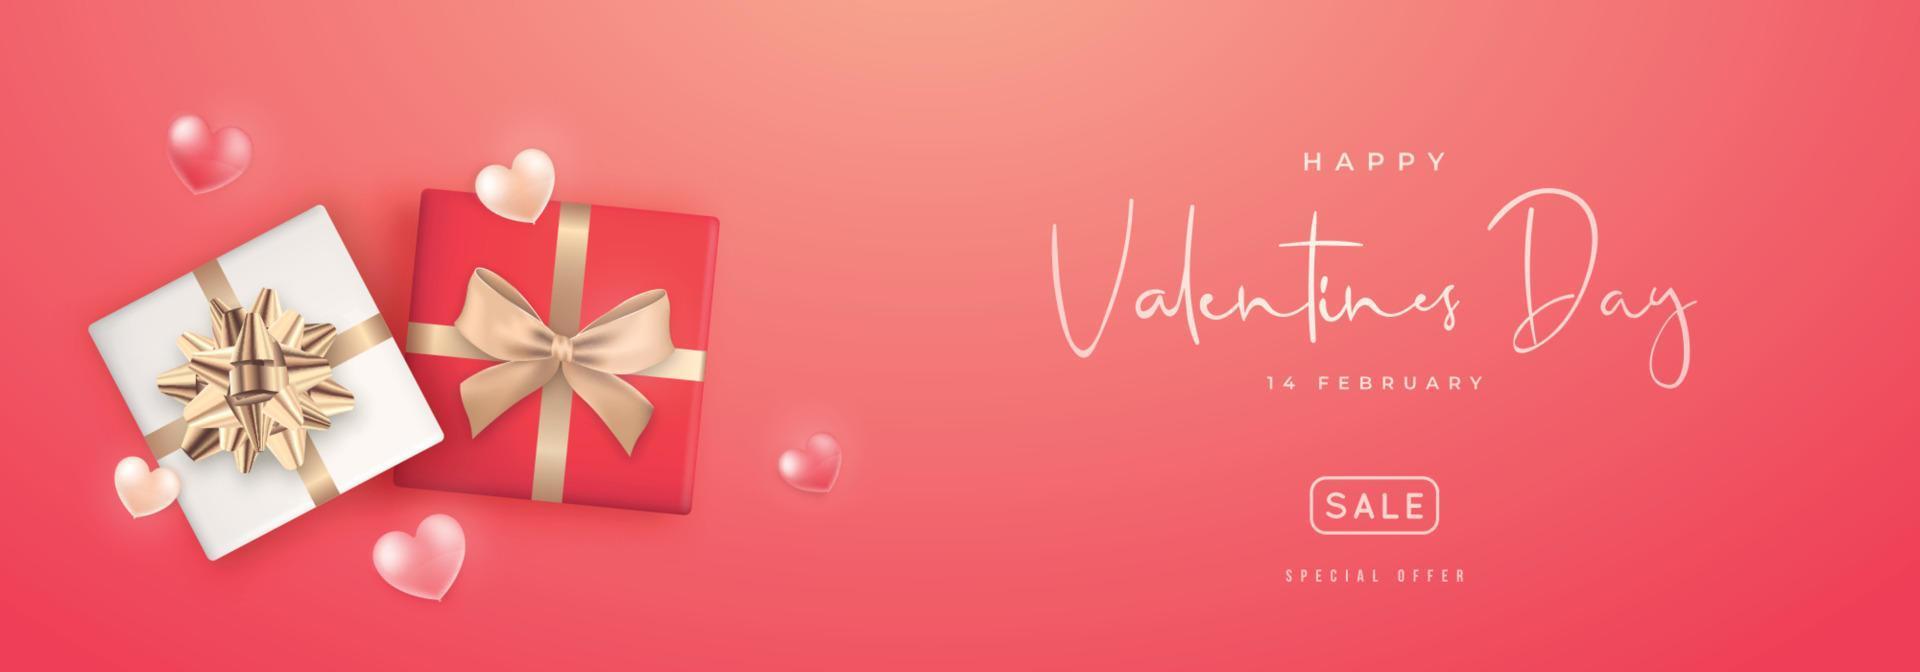 Long Horizontal Valentine's Day Sale Banner. vector